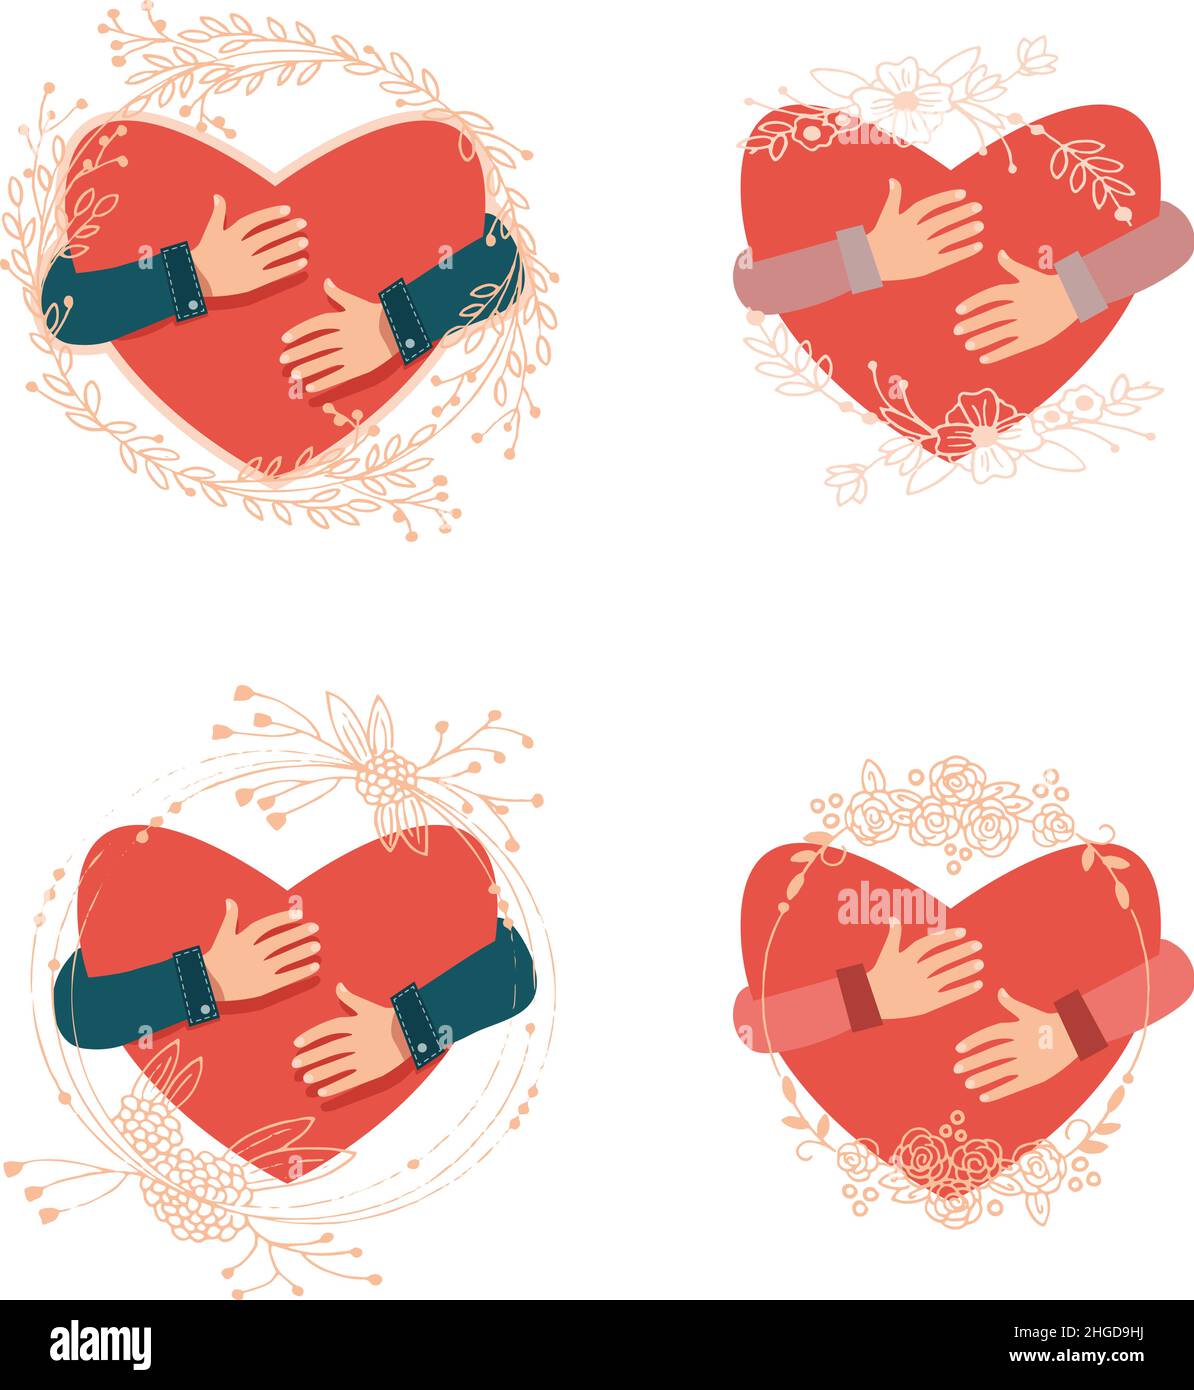 Valentines day aesthetic Stock Vector Images - Alamy